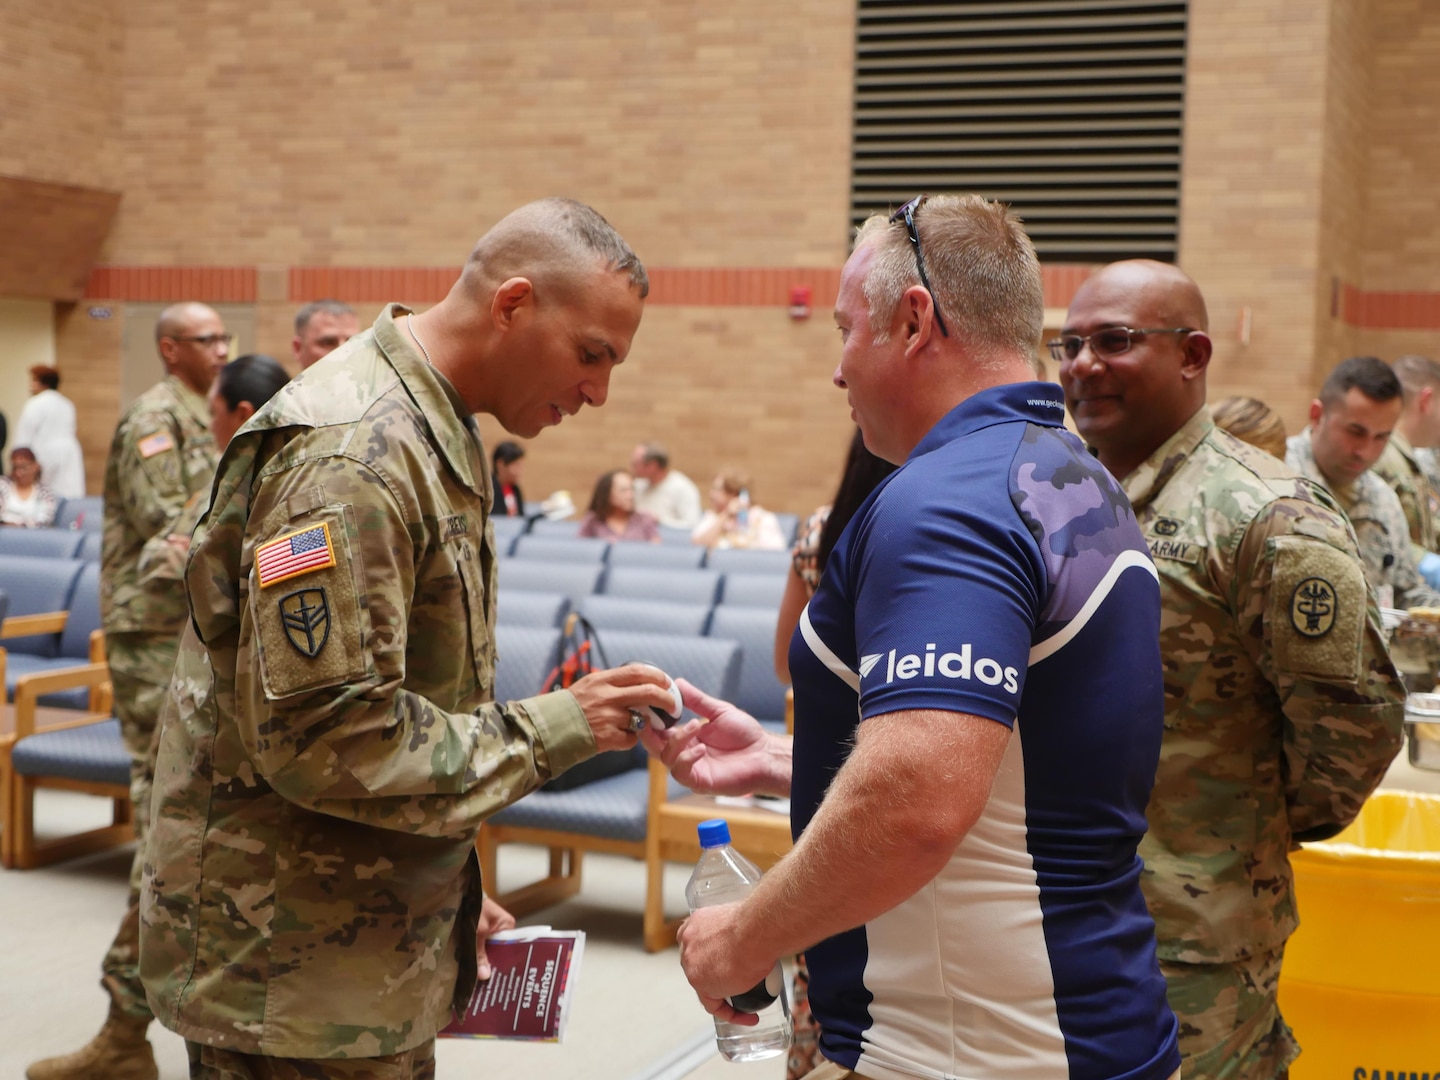 Brooke Army Medical Center Command Sgt. Maj. Albert Crews (left) inspects a miniature souvenir Rugby ball The British Army Medical Services Rugby Team was giving to patrons during their Oct. 14 visit. The team attended the Hispanic Heritage Day ceremony in the medical mall and toured the Center for the Intrepid.